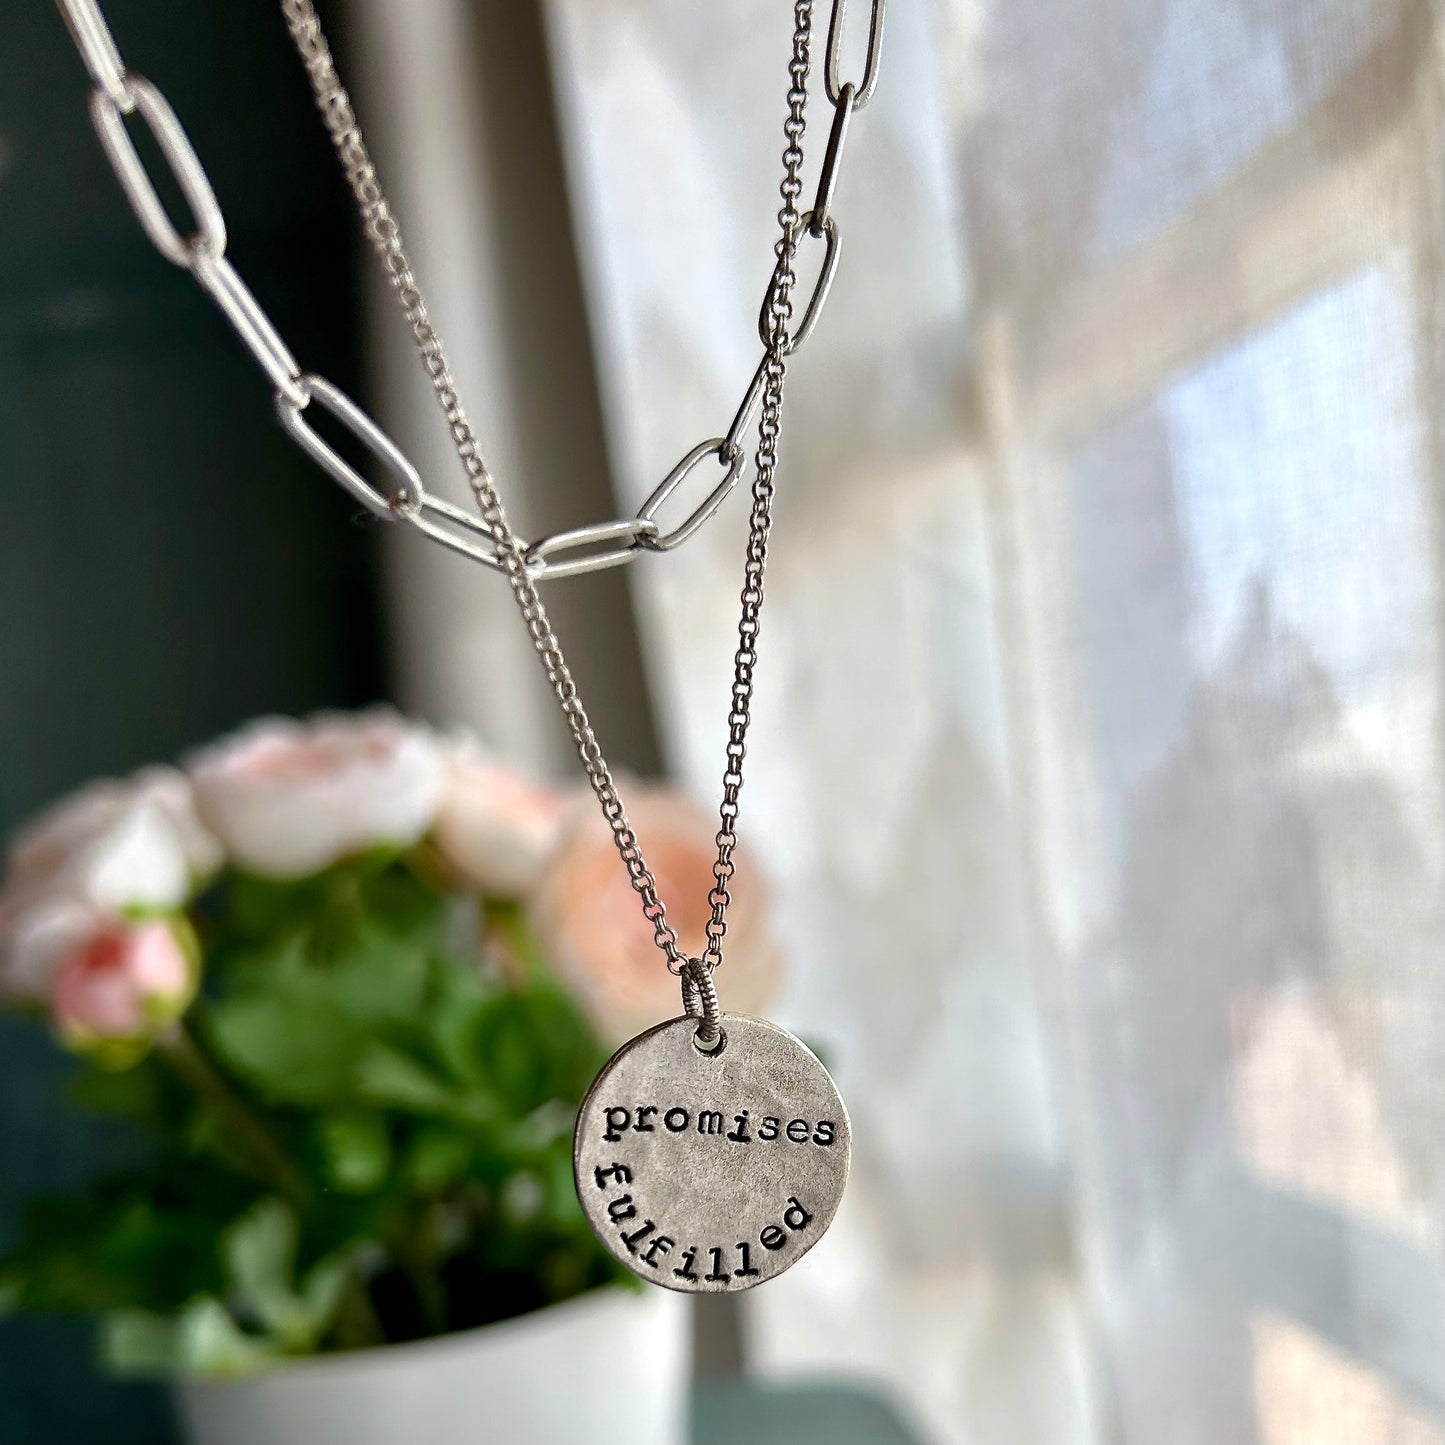 Promises Fulfilled Layered Necklace